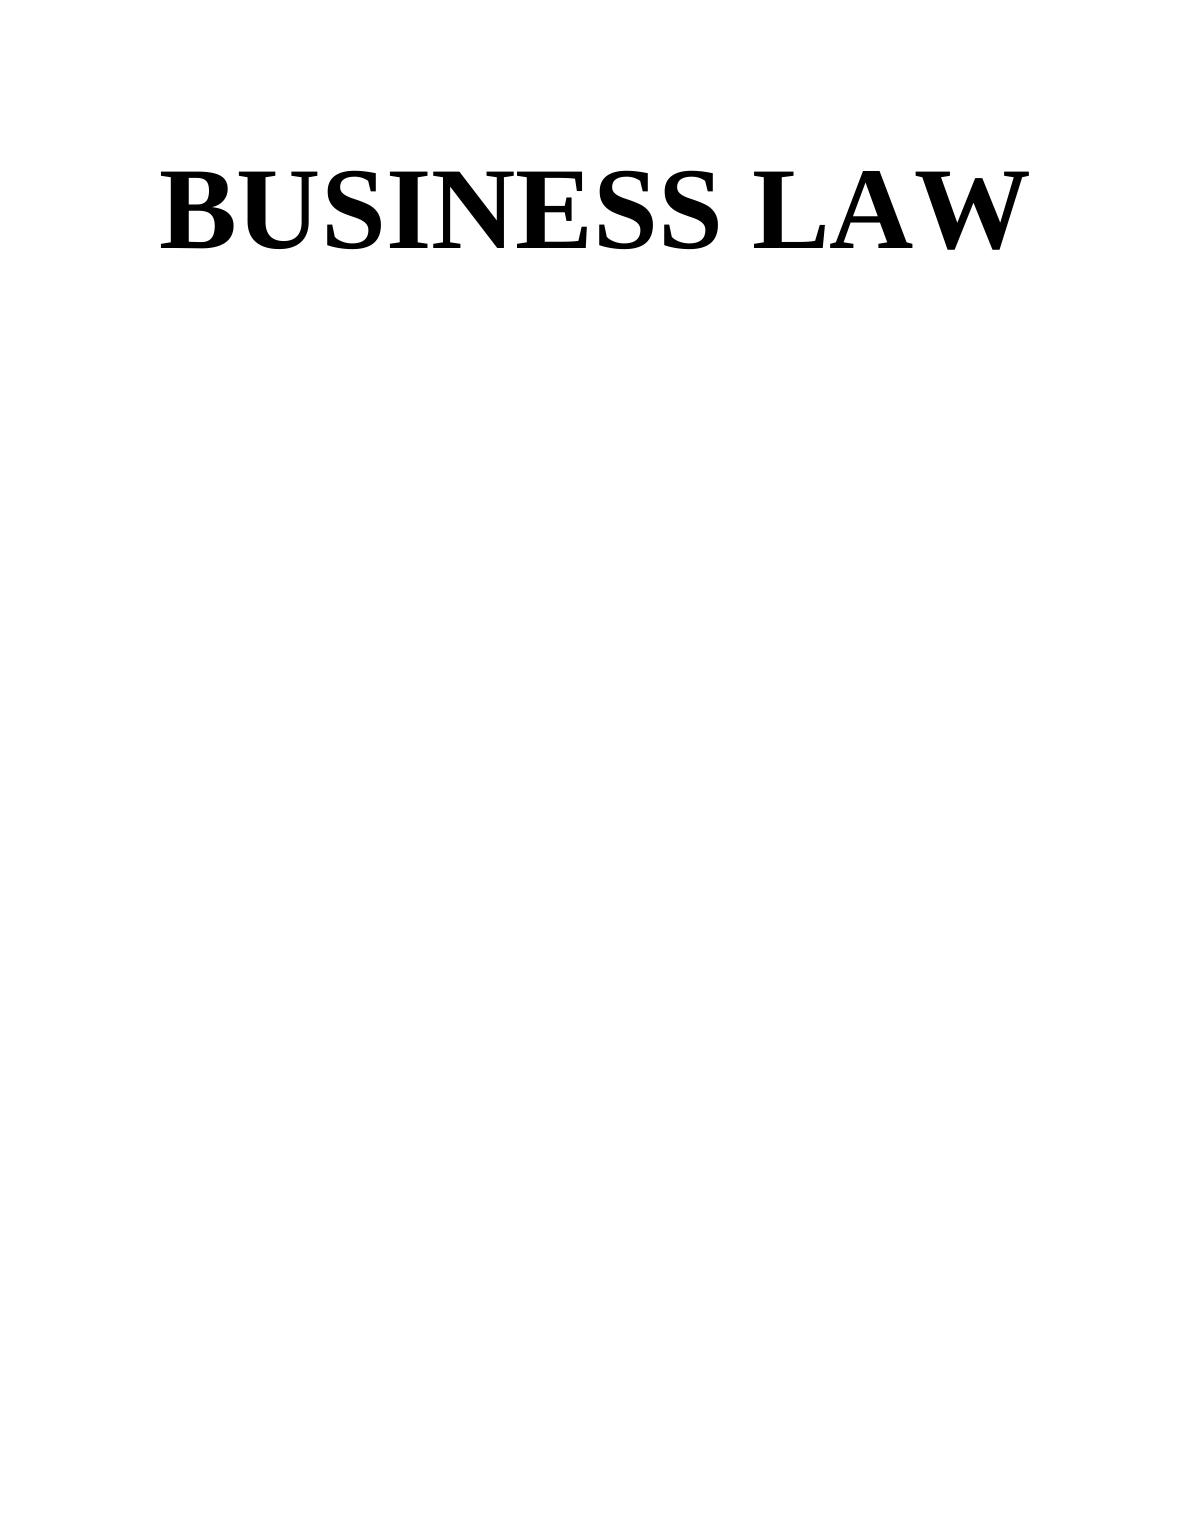 Sample Assignment On Business Law | doc_1